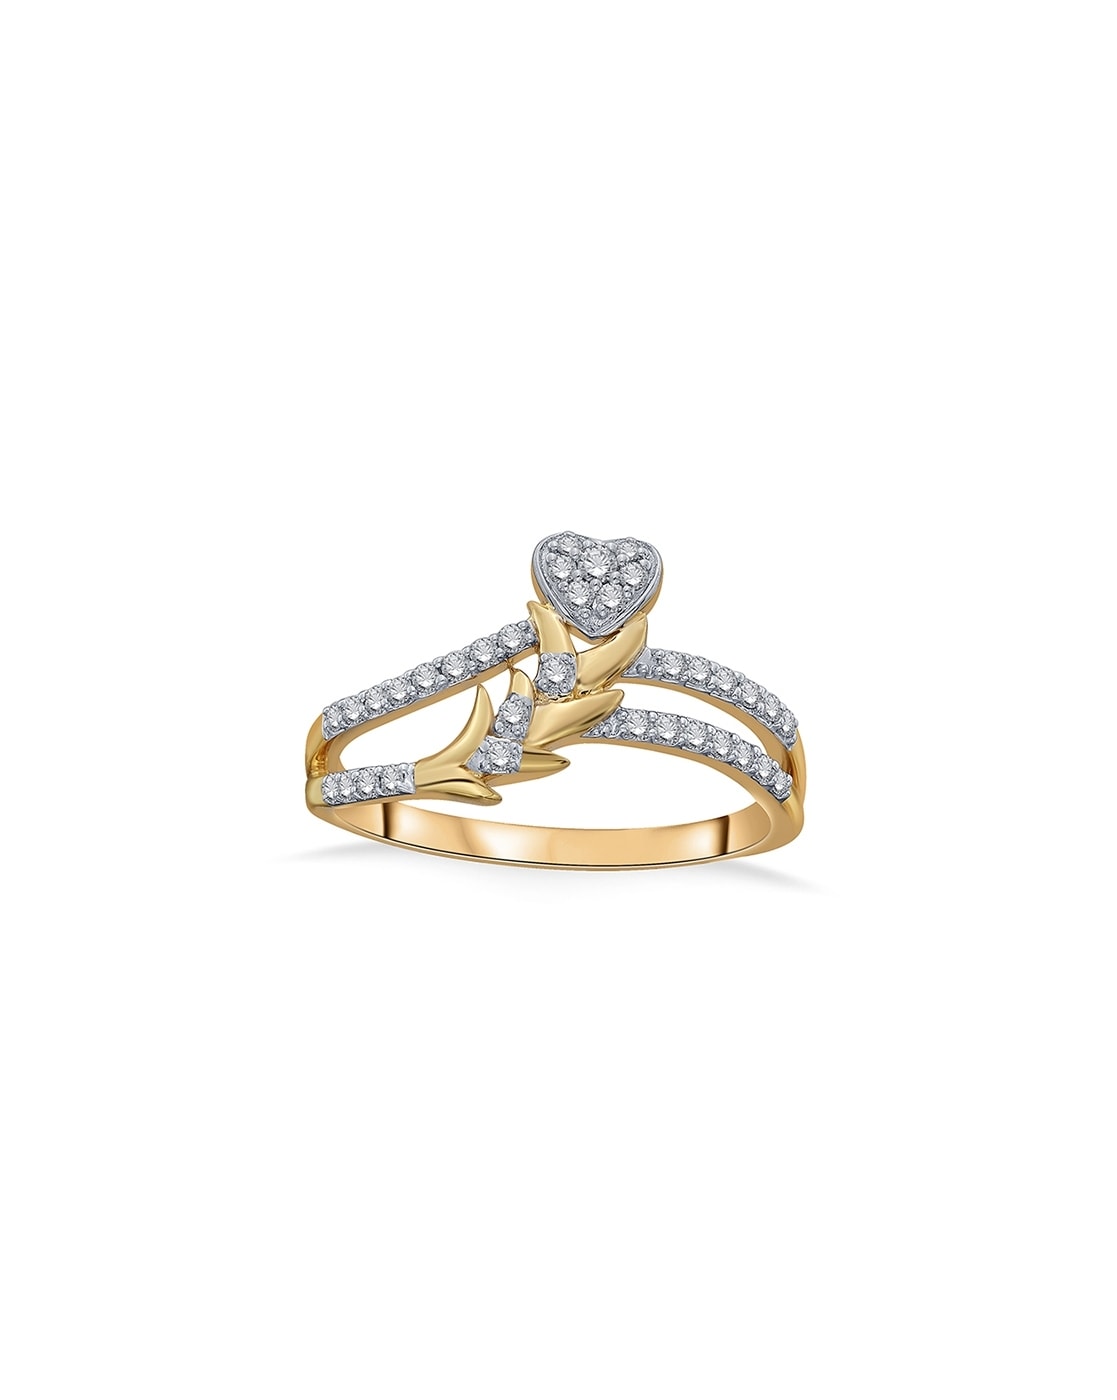 Buy Reliance Jewels 14KT Diamond Ring 1.23 g Online at Best Prices in India  - JioMart.